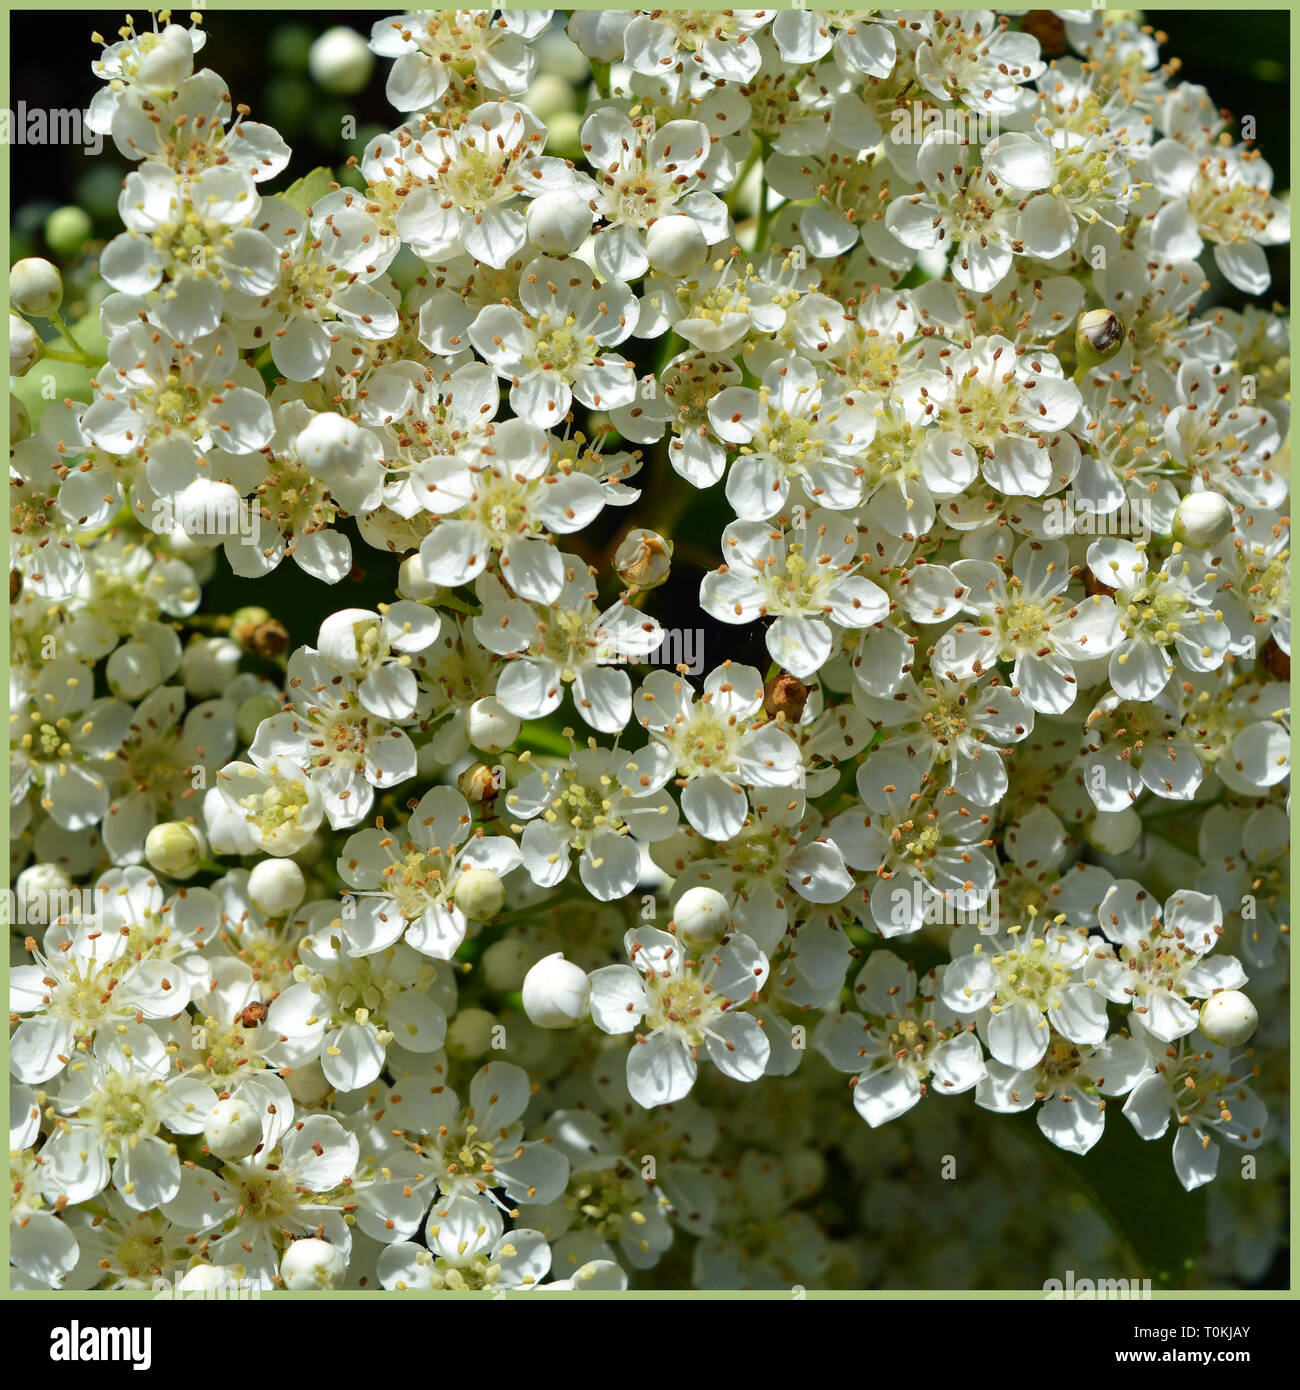 Closeup of perfect white hawthorn buds and blossoms well lit by sunshine. Stock Photo